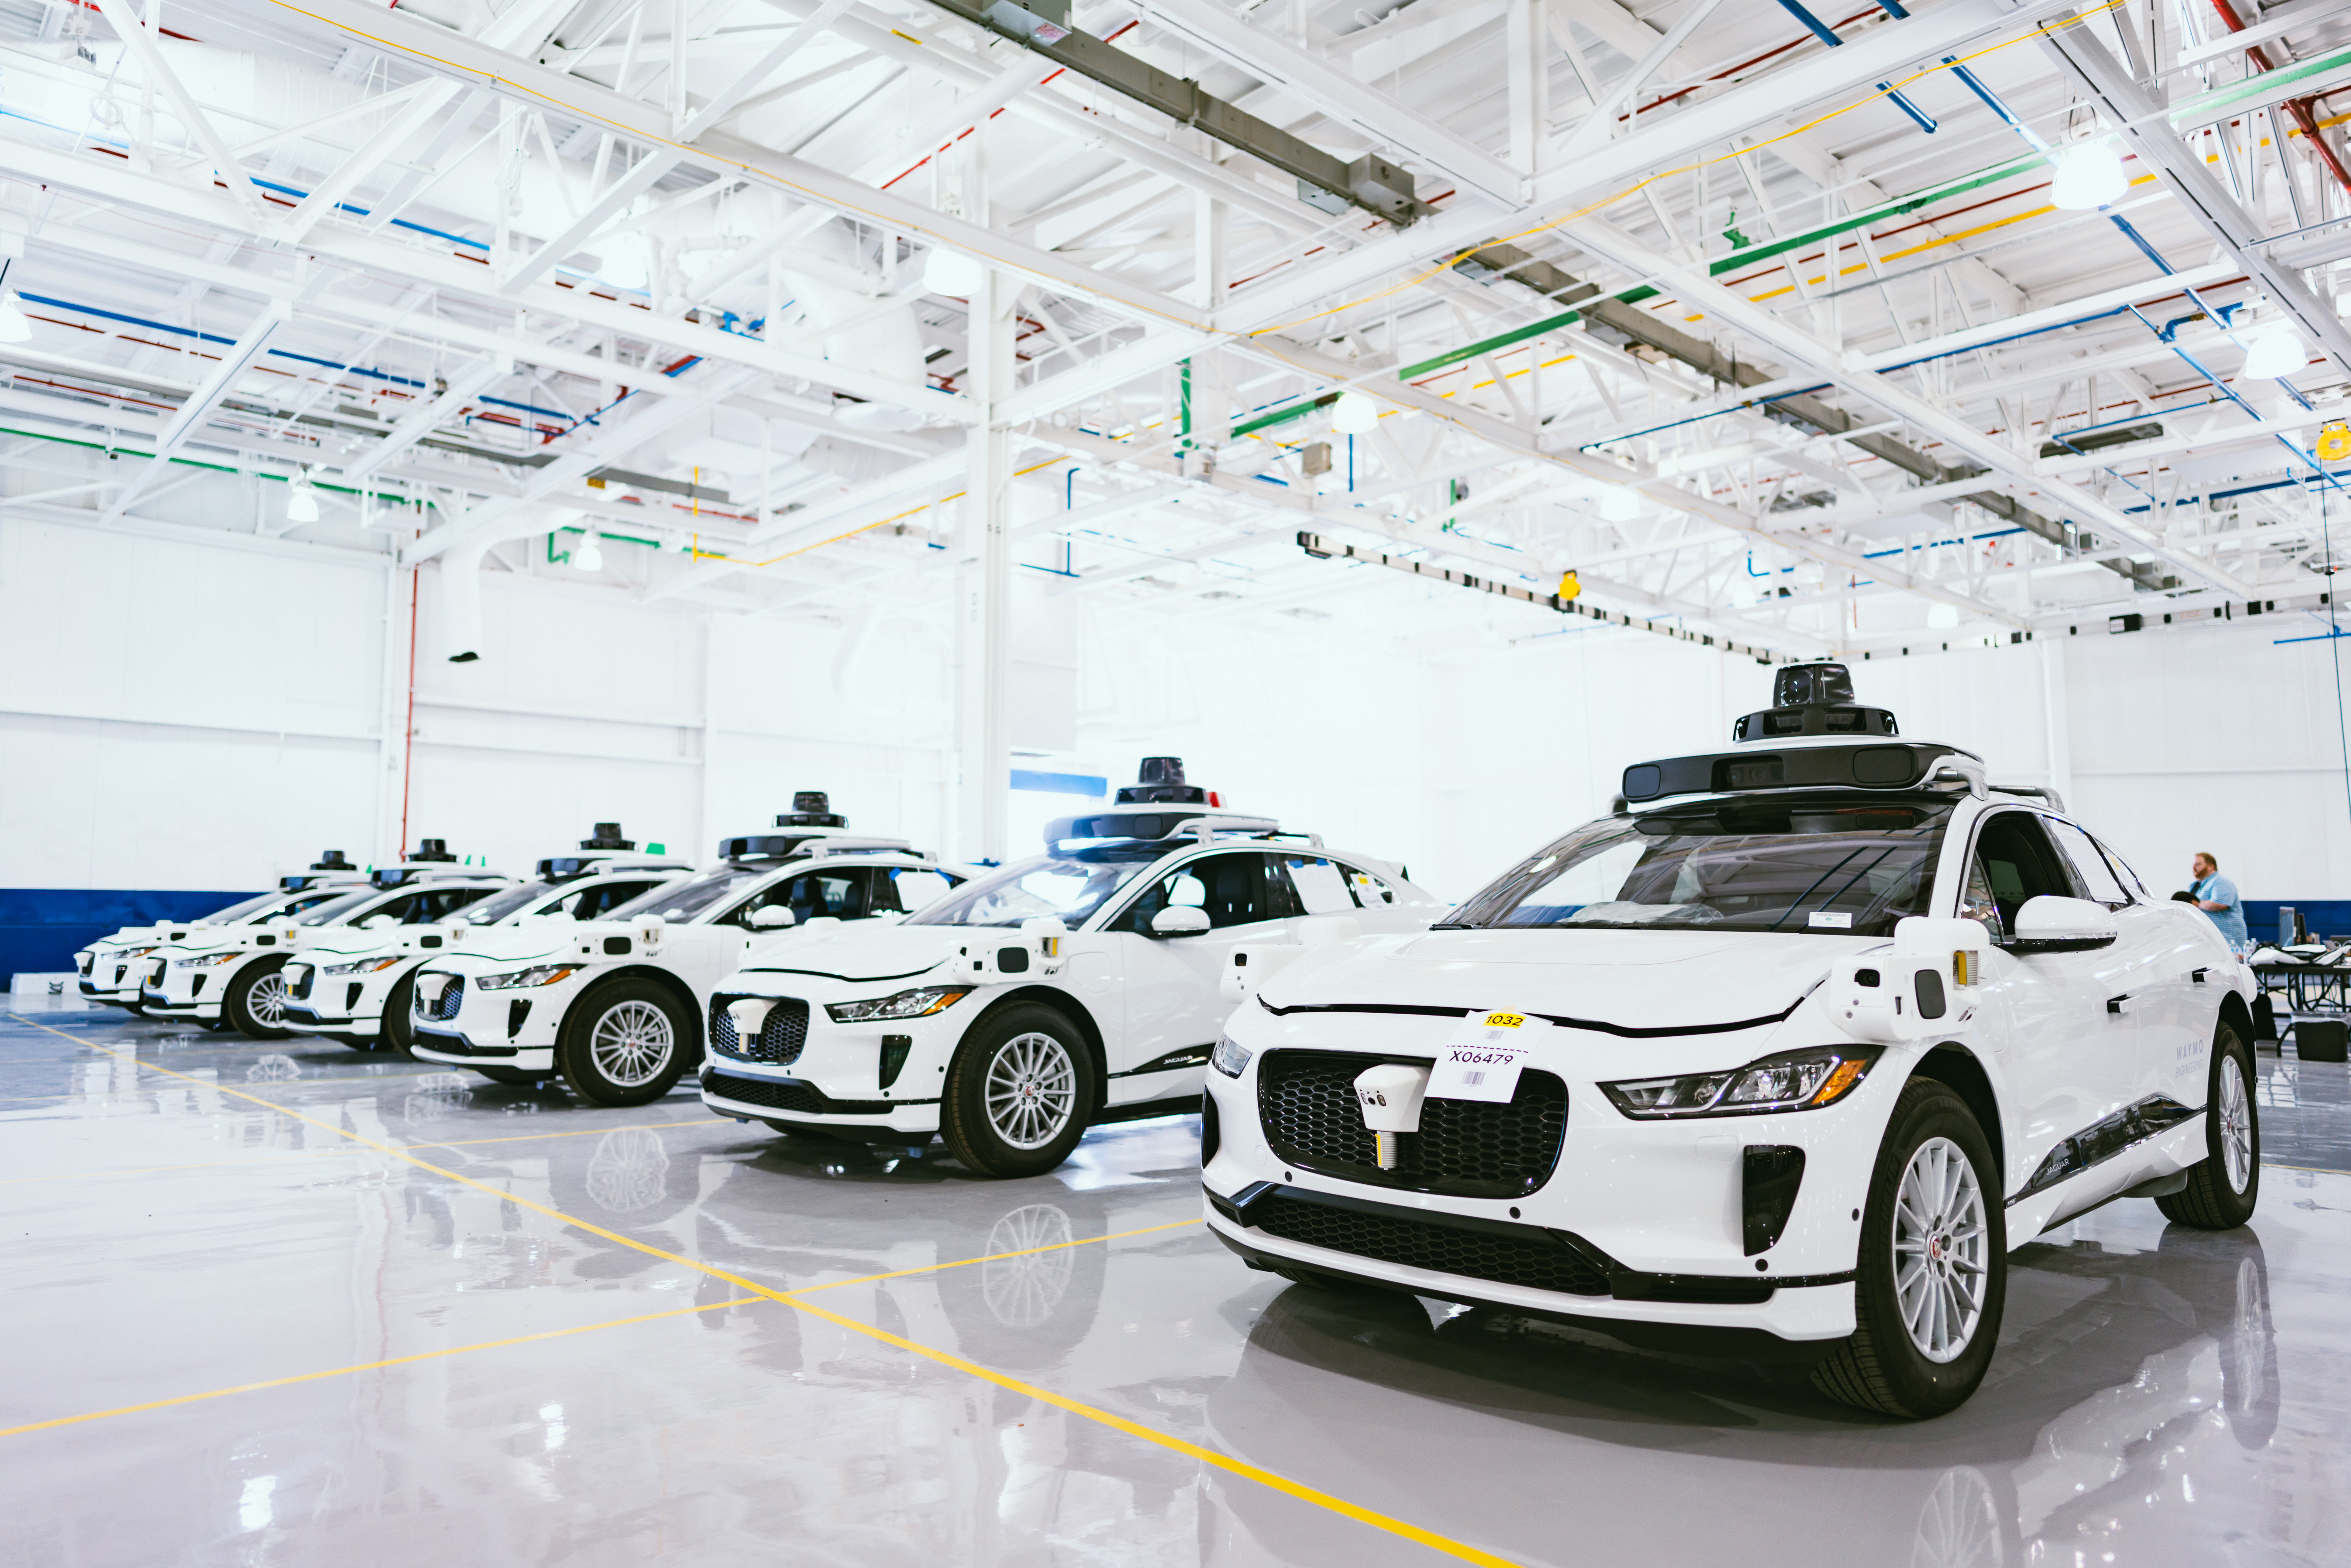 A row of six white sedans idle in a large warehouse with with steel beams in the ceiling. There are black cameras mounted on top of the cars.